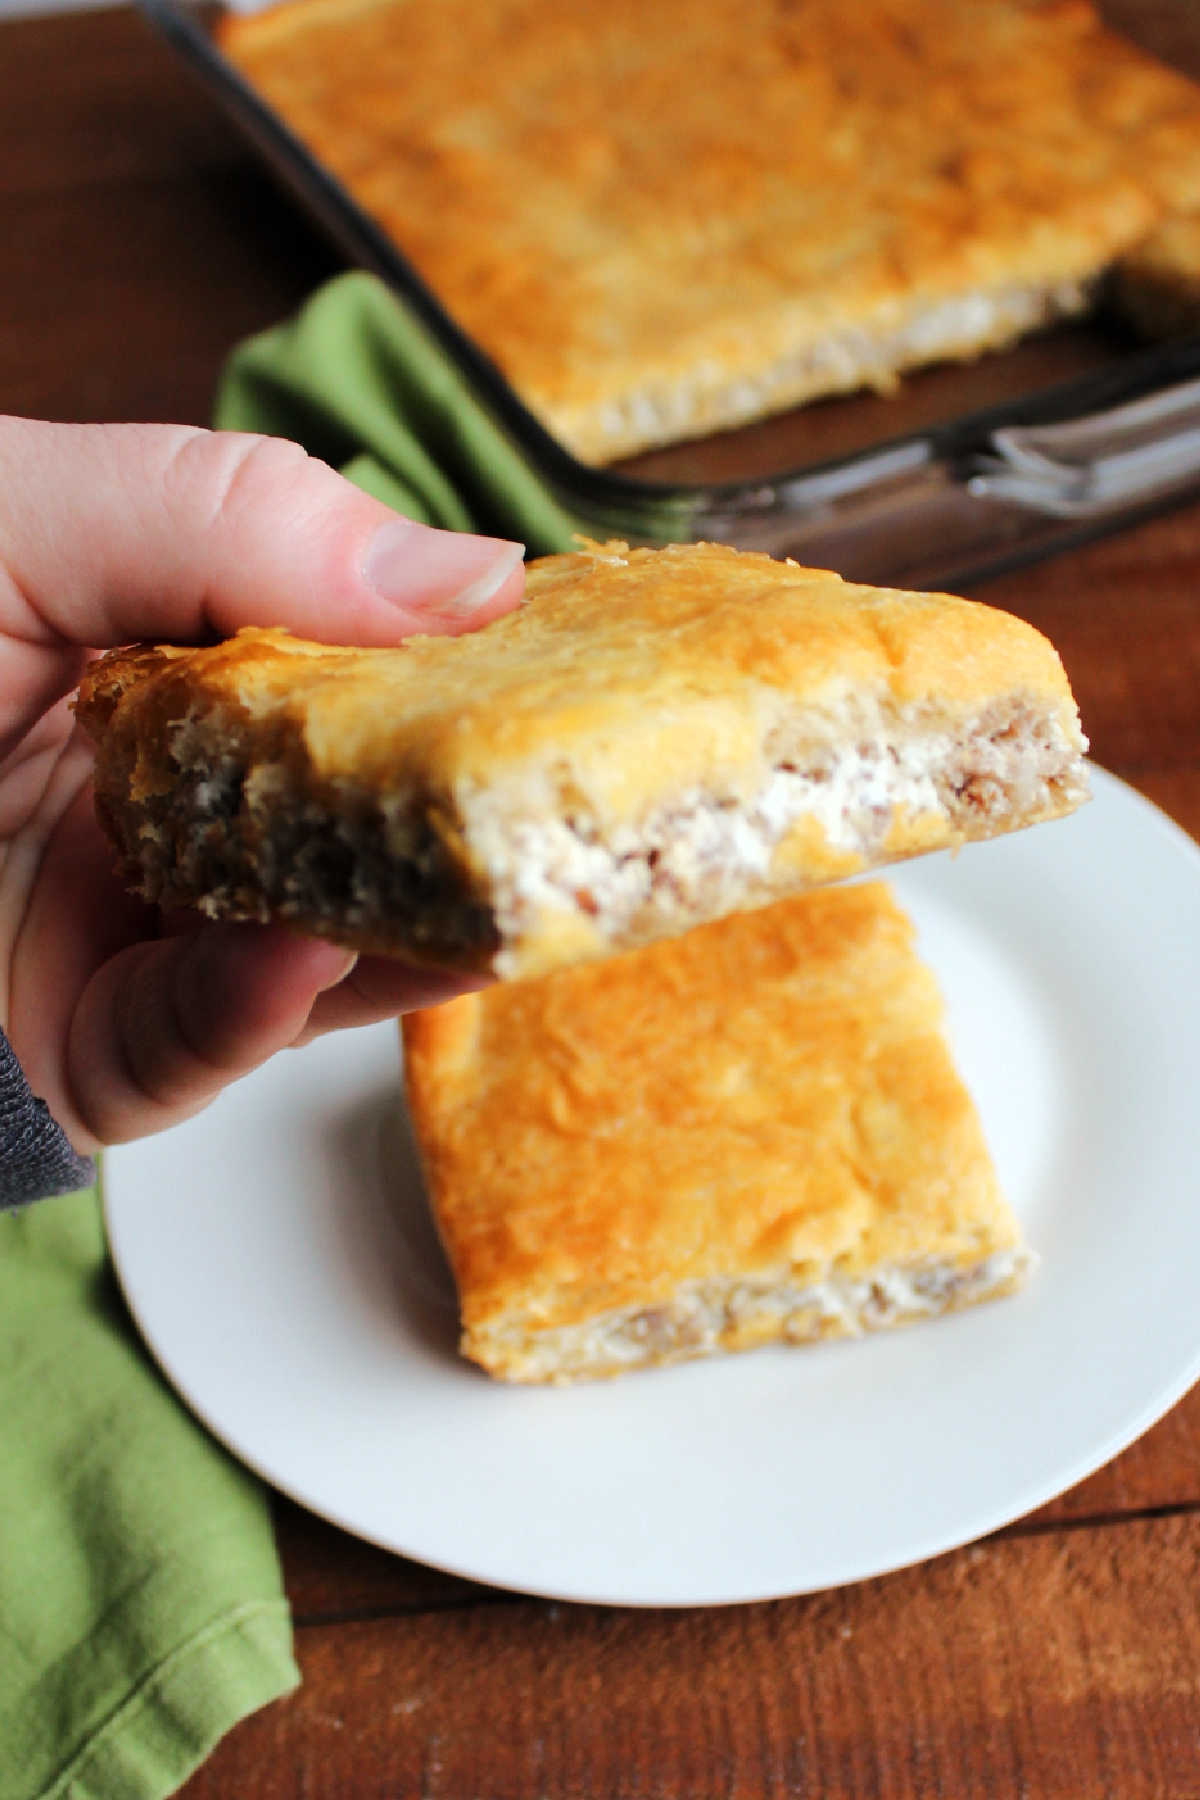 Hand holding cream cheese and sausage crescent bar showing cheesy sausage filling.